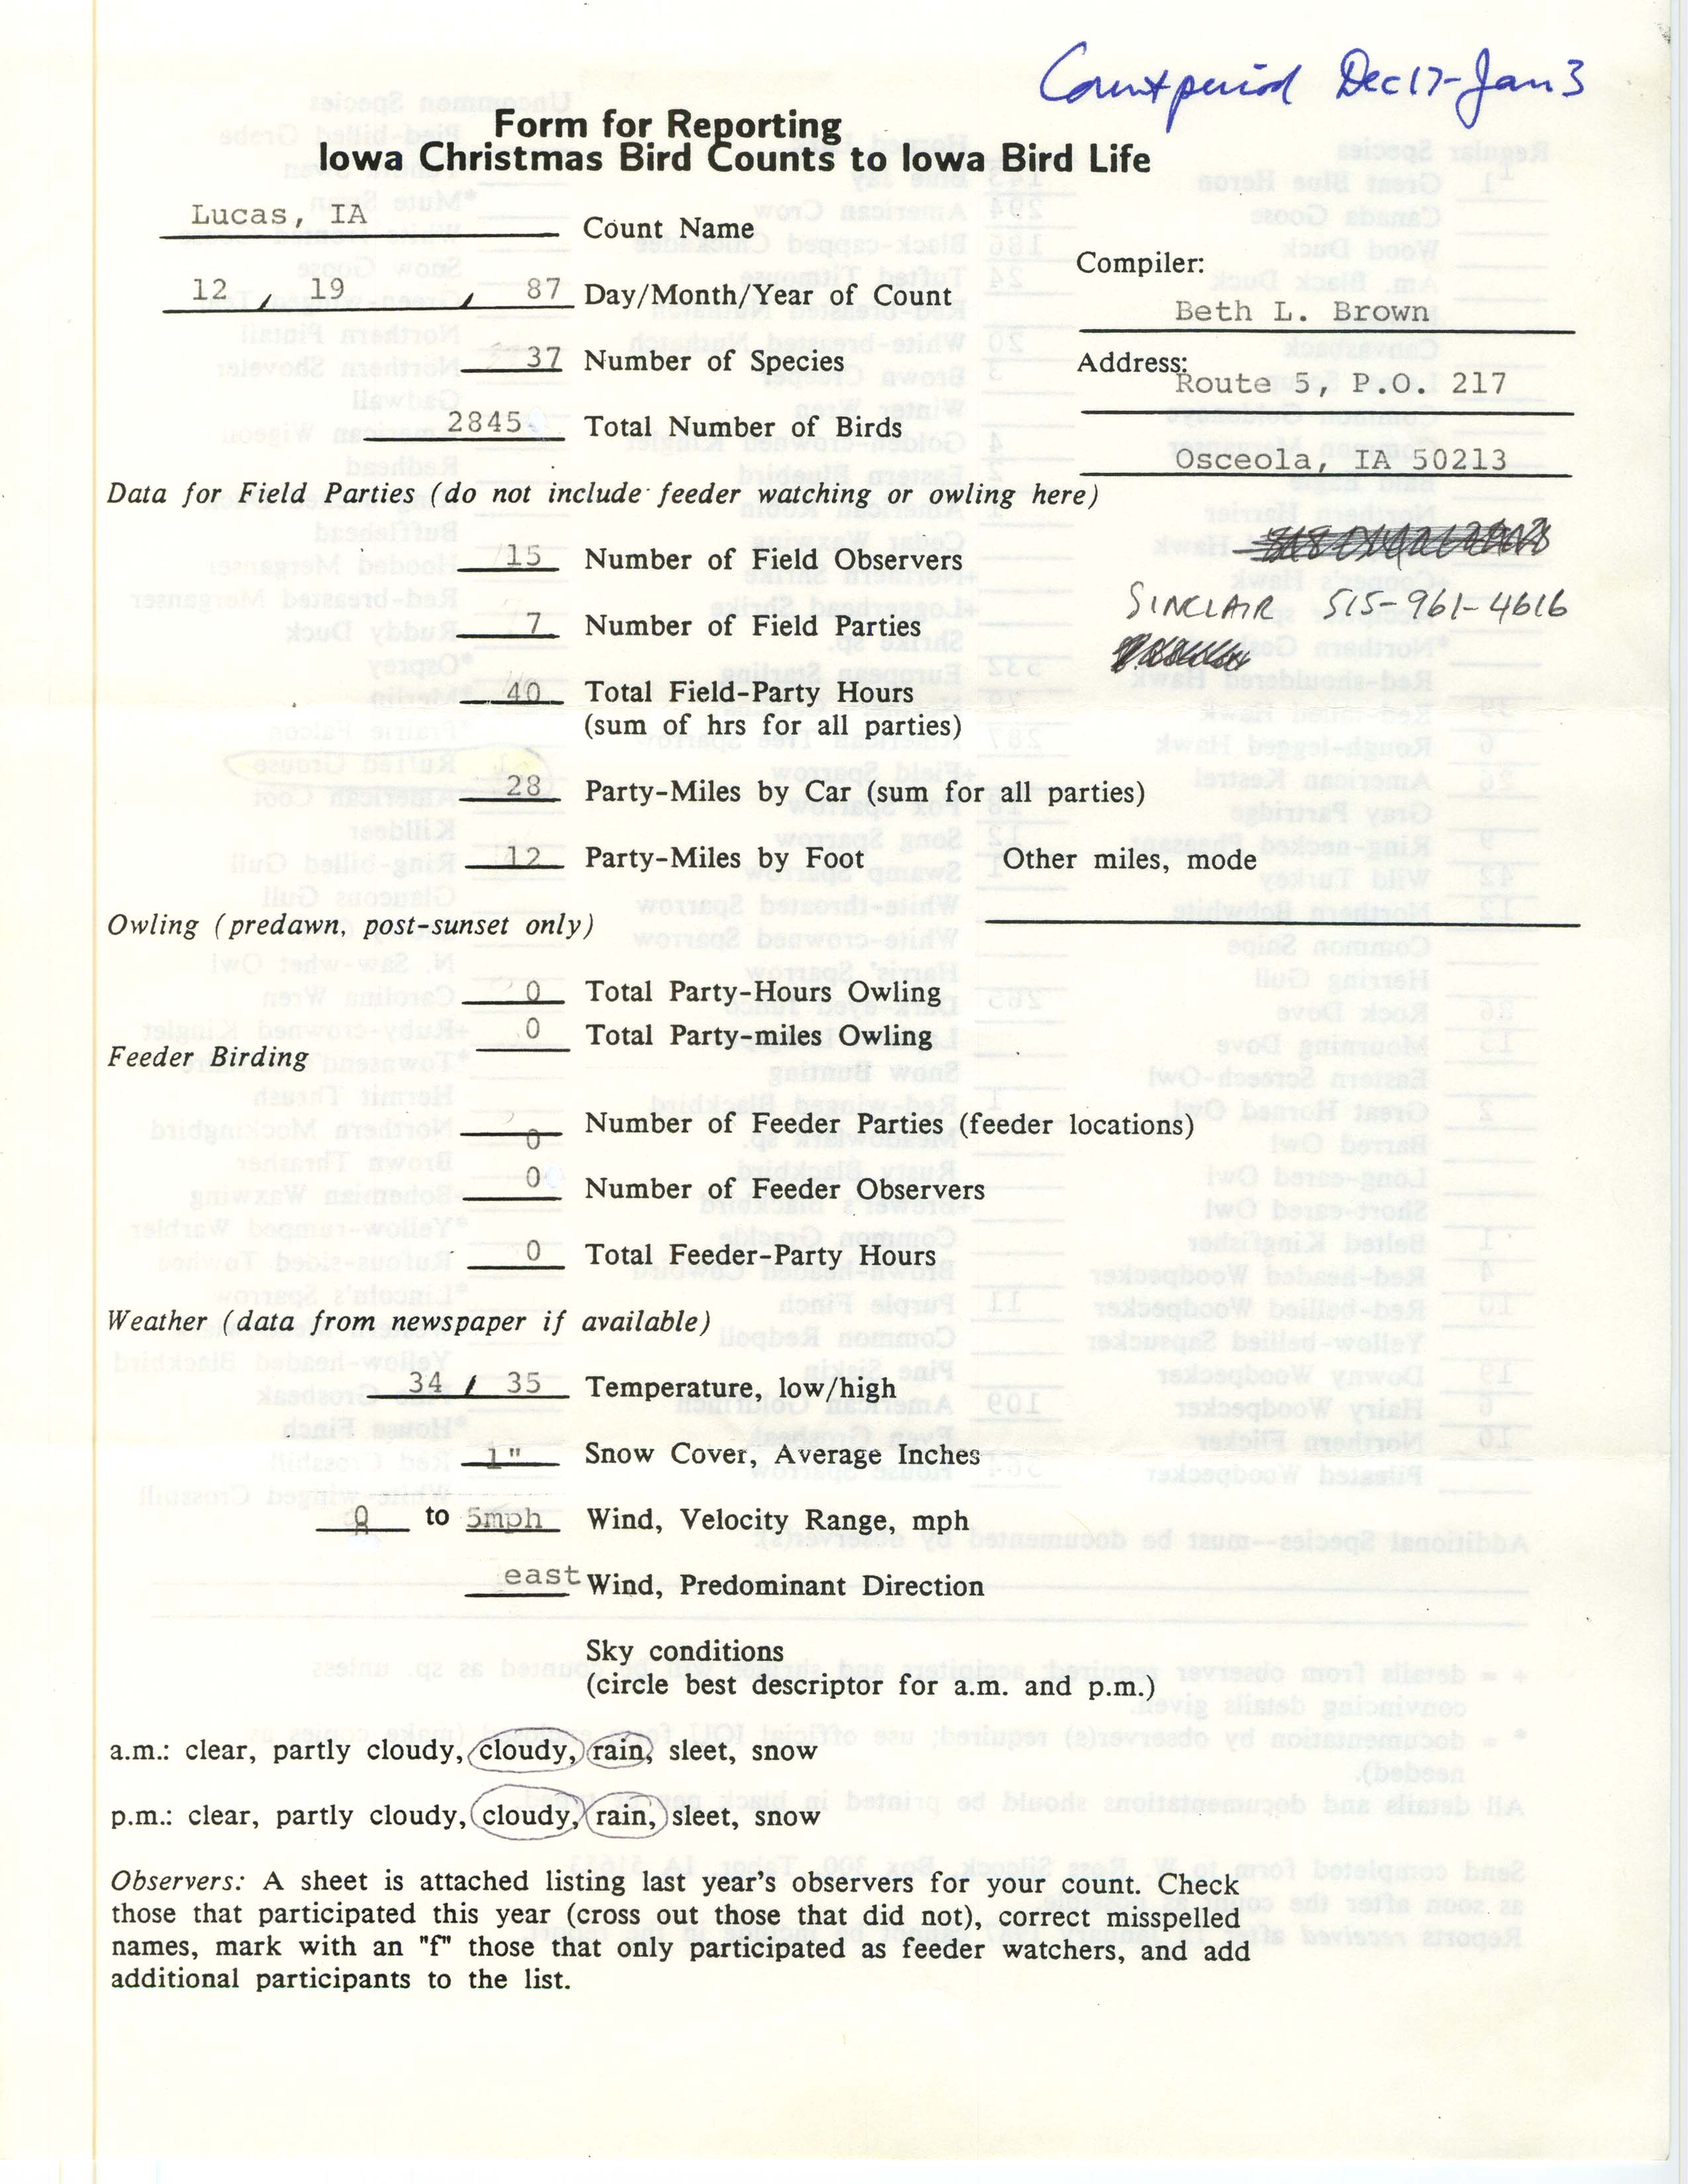 Form for reporting Iowa Christmas bird counts to Iowa Bird Life, Beth Brown, December 19, 1987